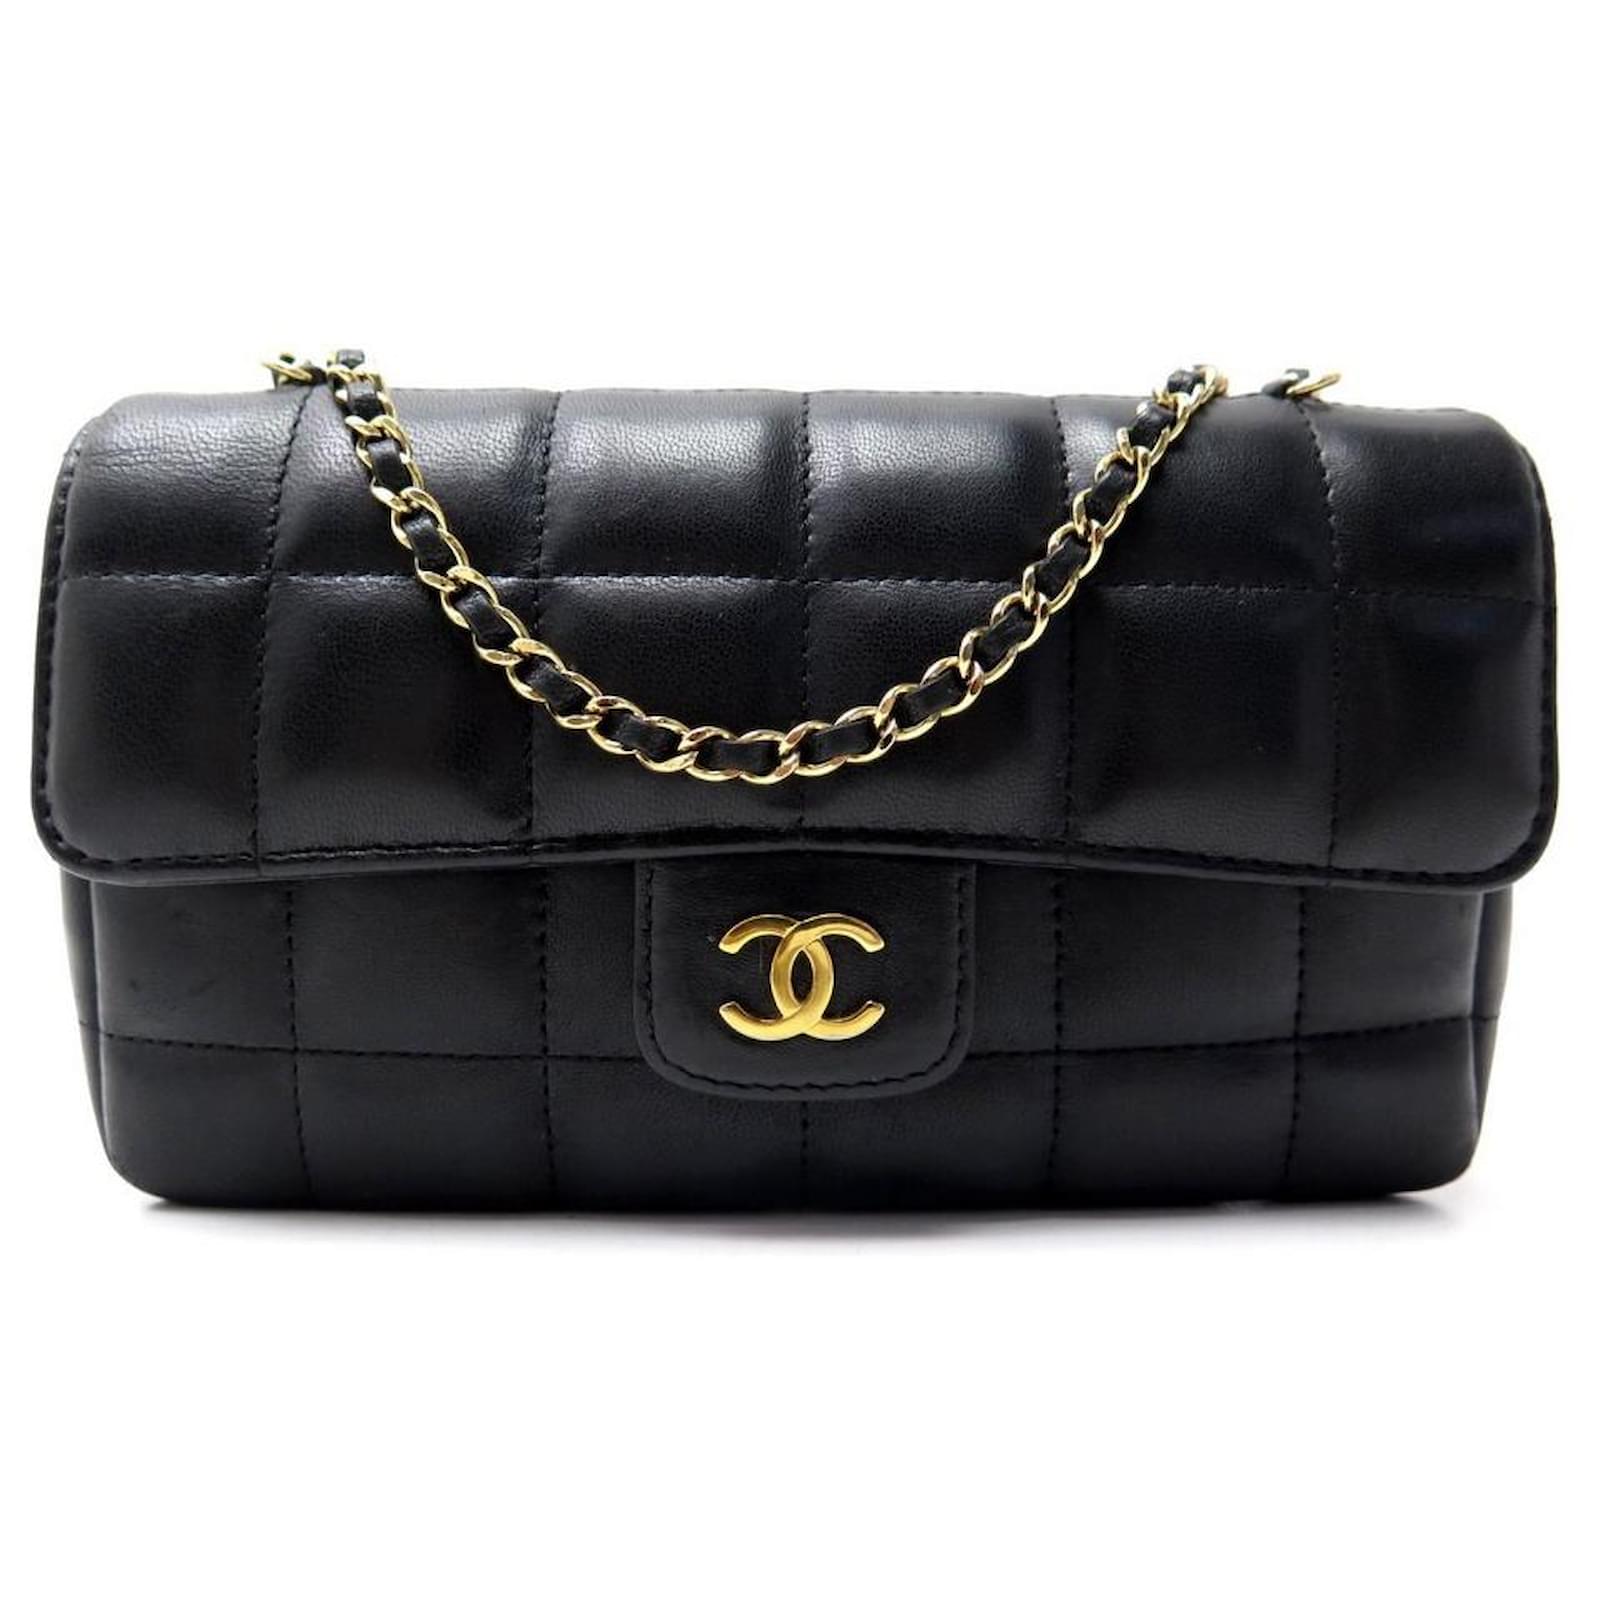 CHANEL CAMELIA MINI HANDBAG IN BLACK QUILTED LEATHER BANDOULIERE